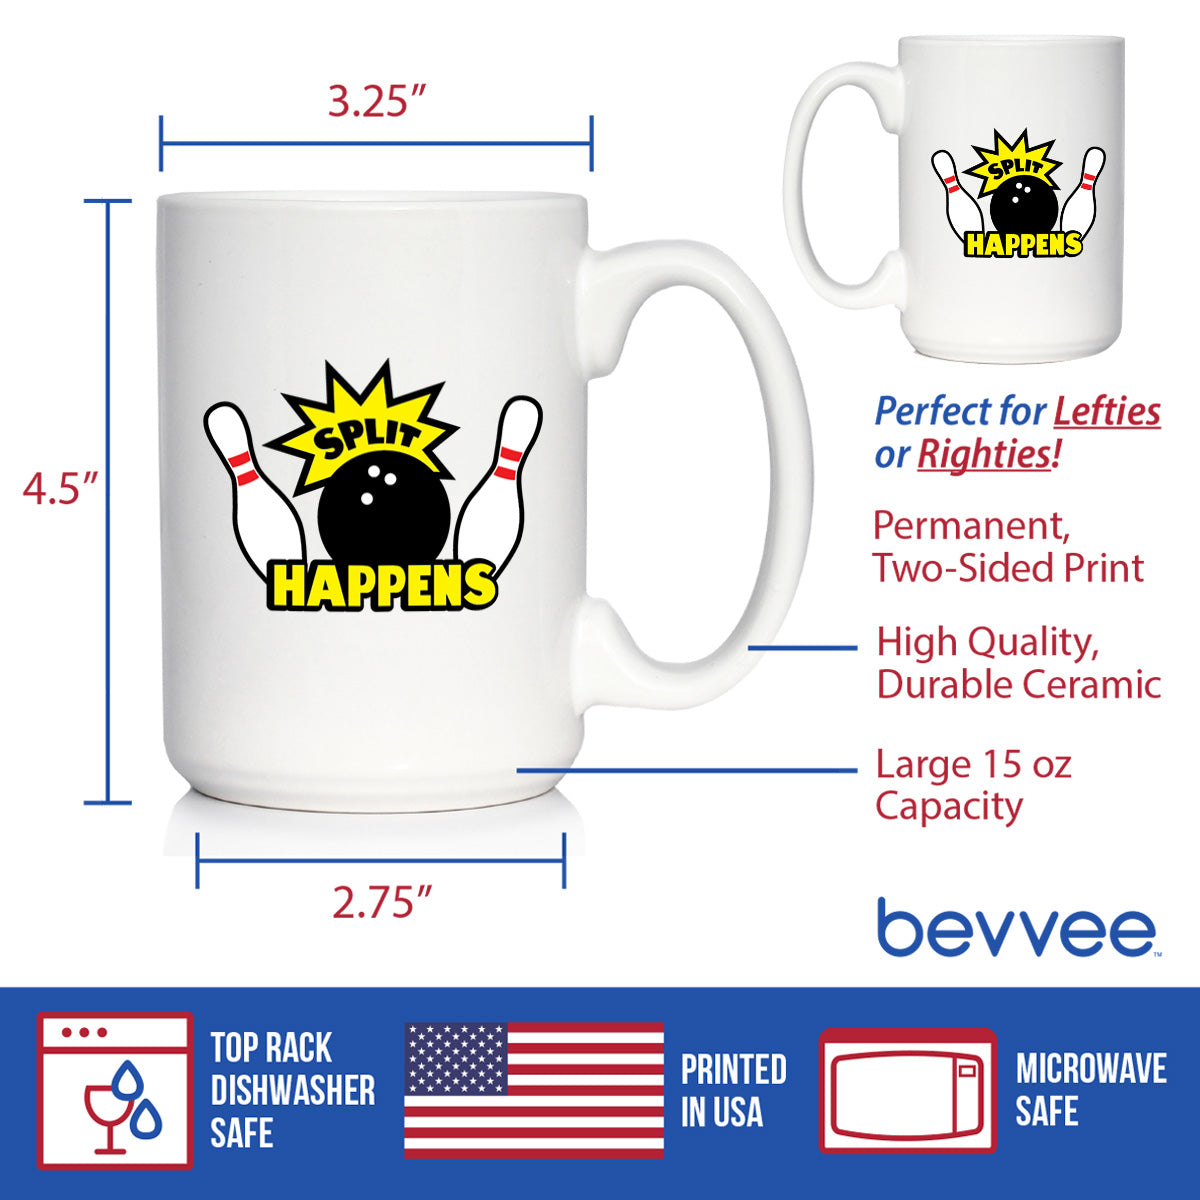 Split Happens - Bowling Coffee Mug - Funny Bowling Gifts and Decor for Bowlers